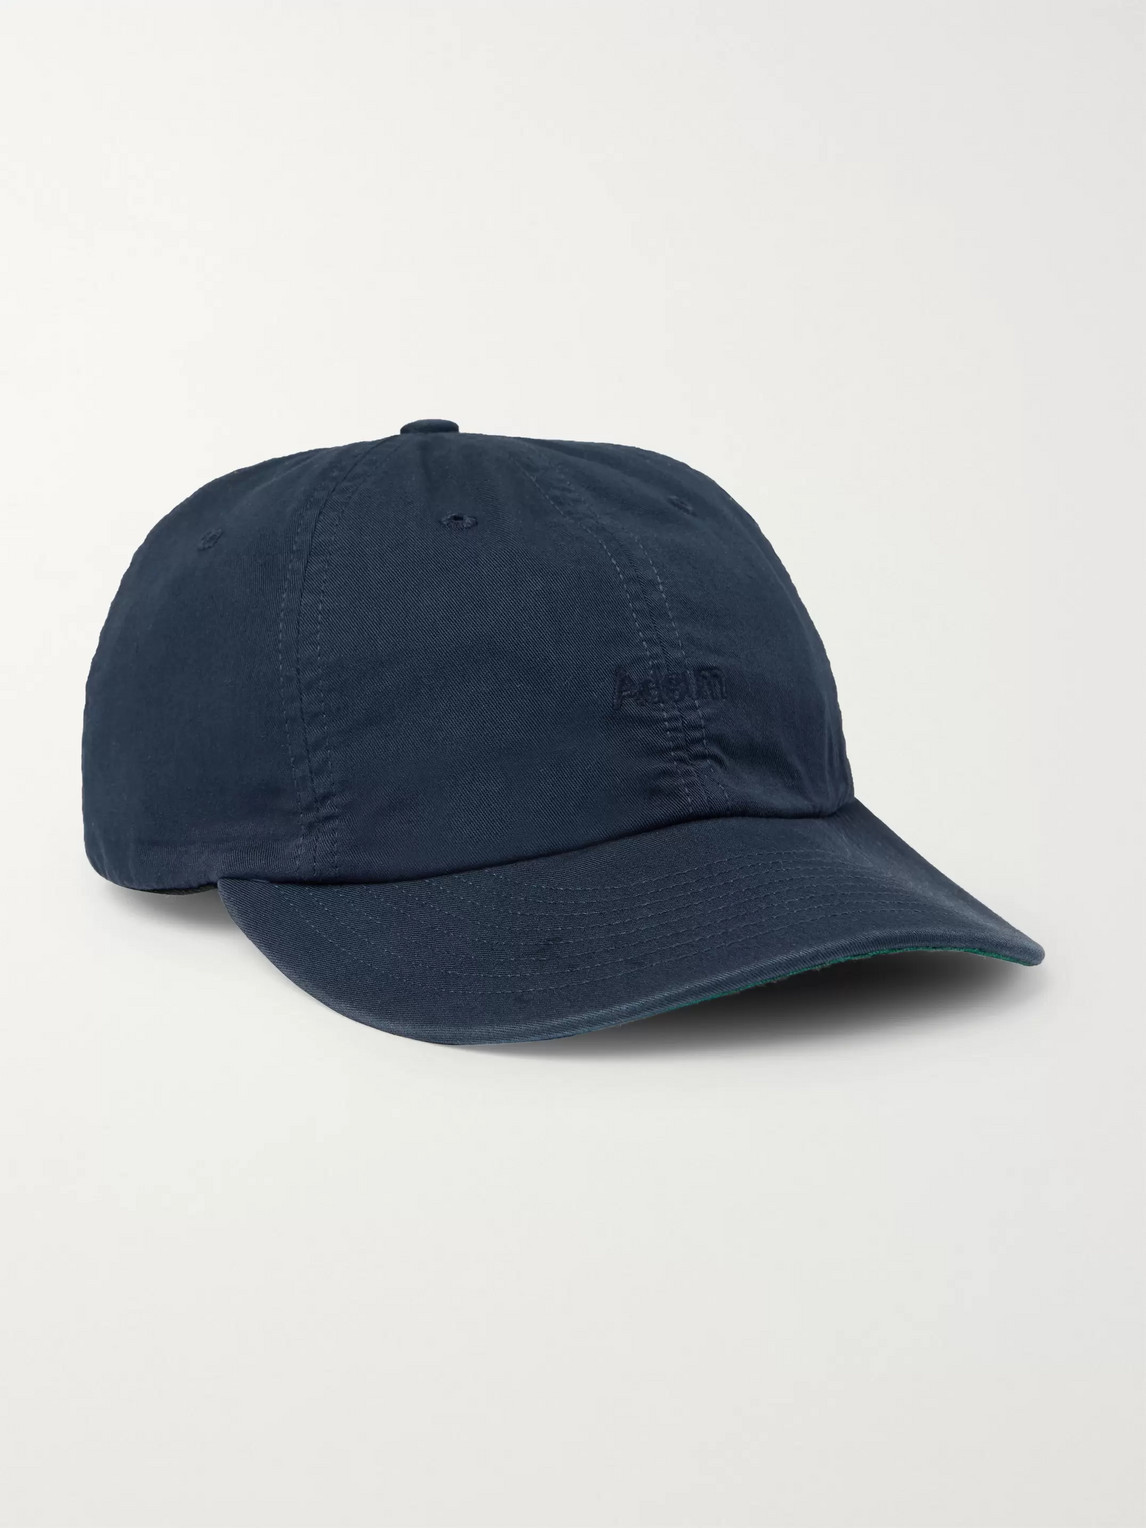 ADSUM LOGO-EMBROIDERED LEATHER-TRIMMED COTTON-TWILL BASEBALL CAP